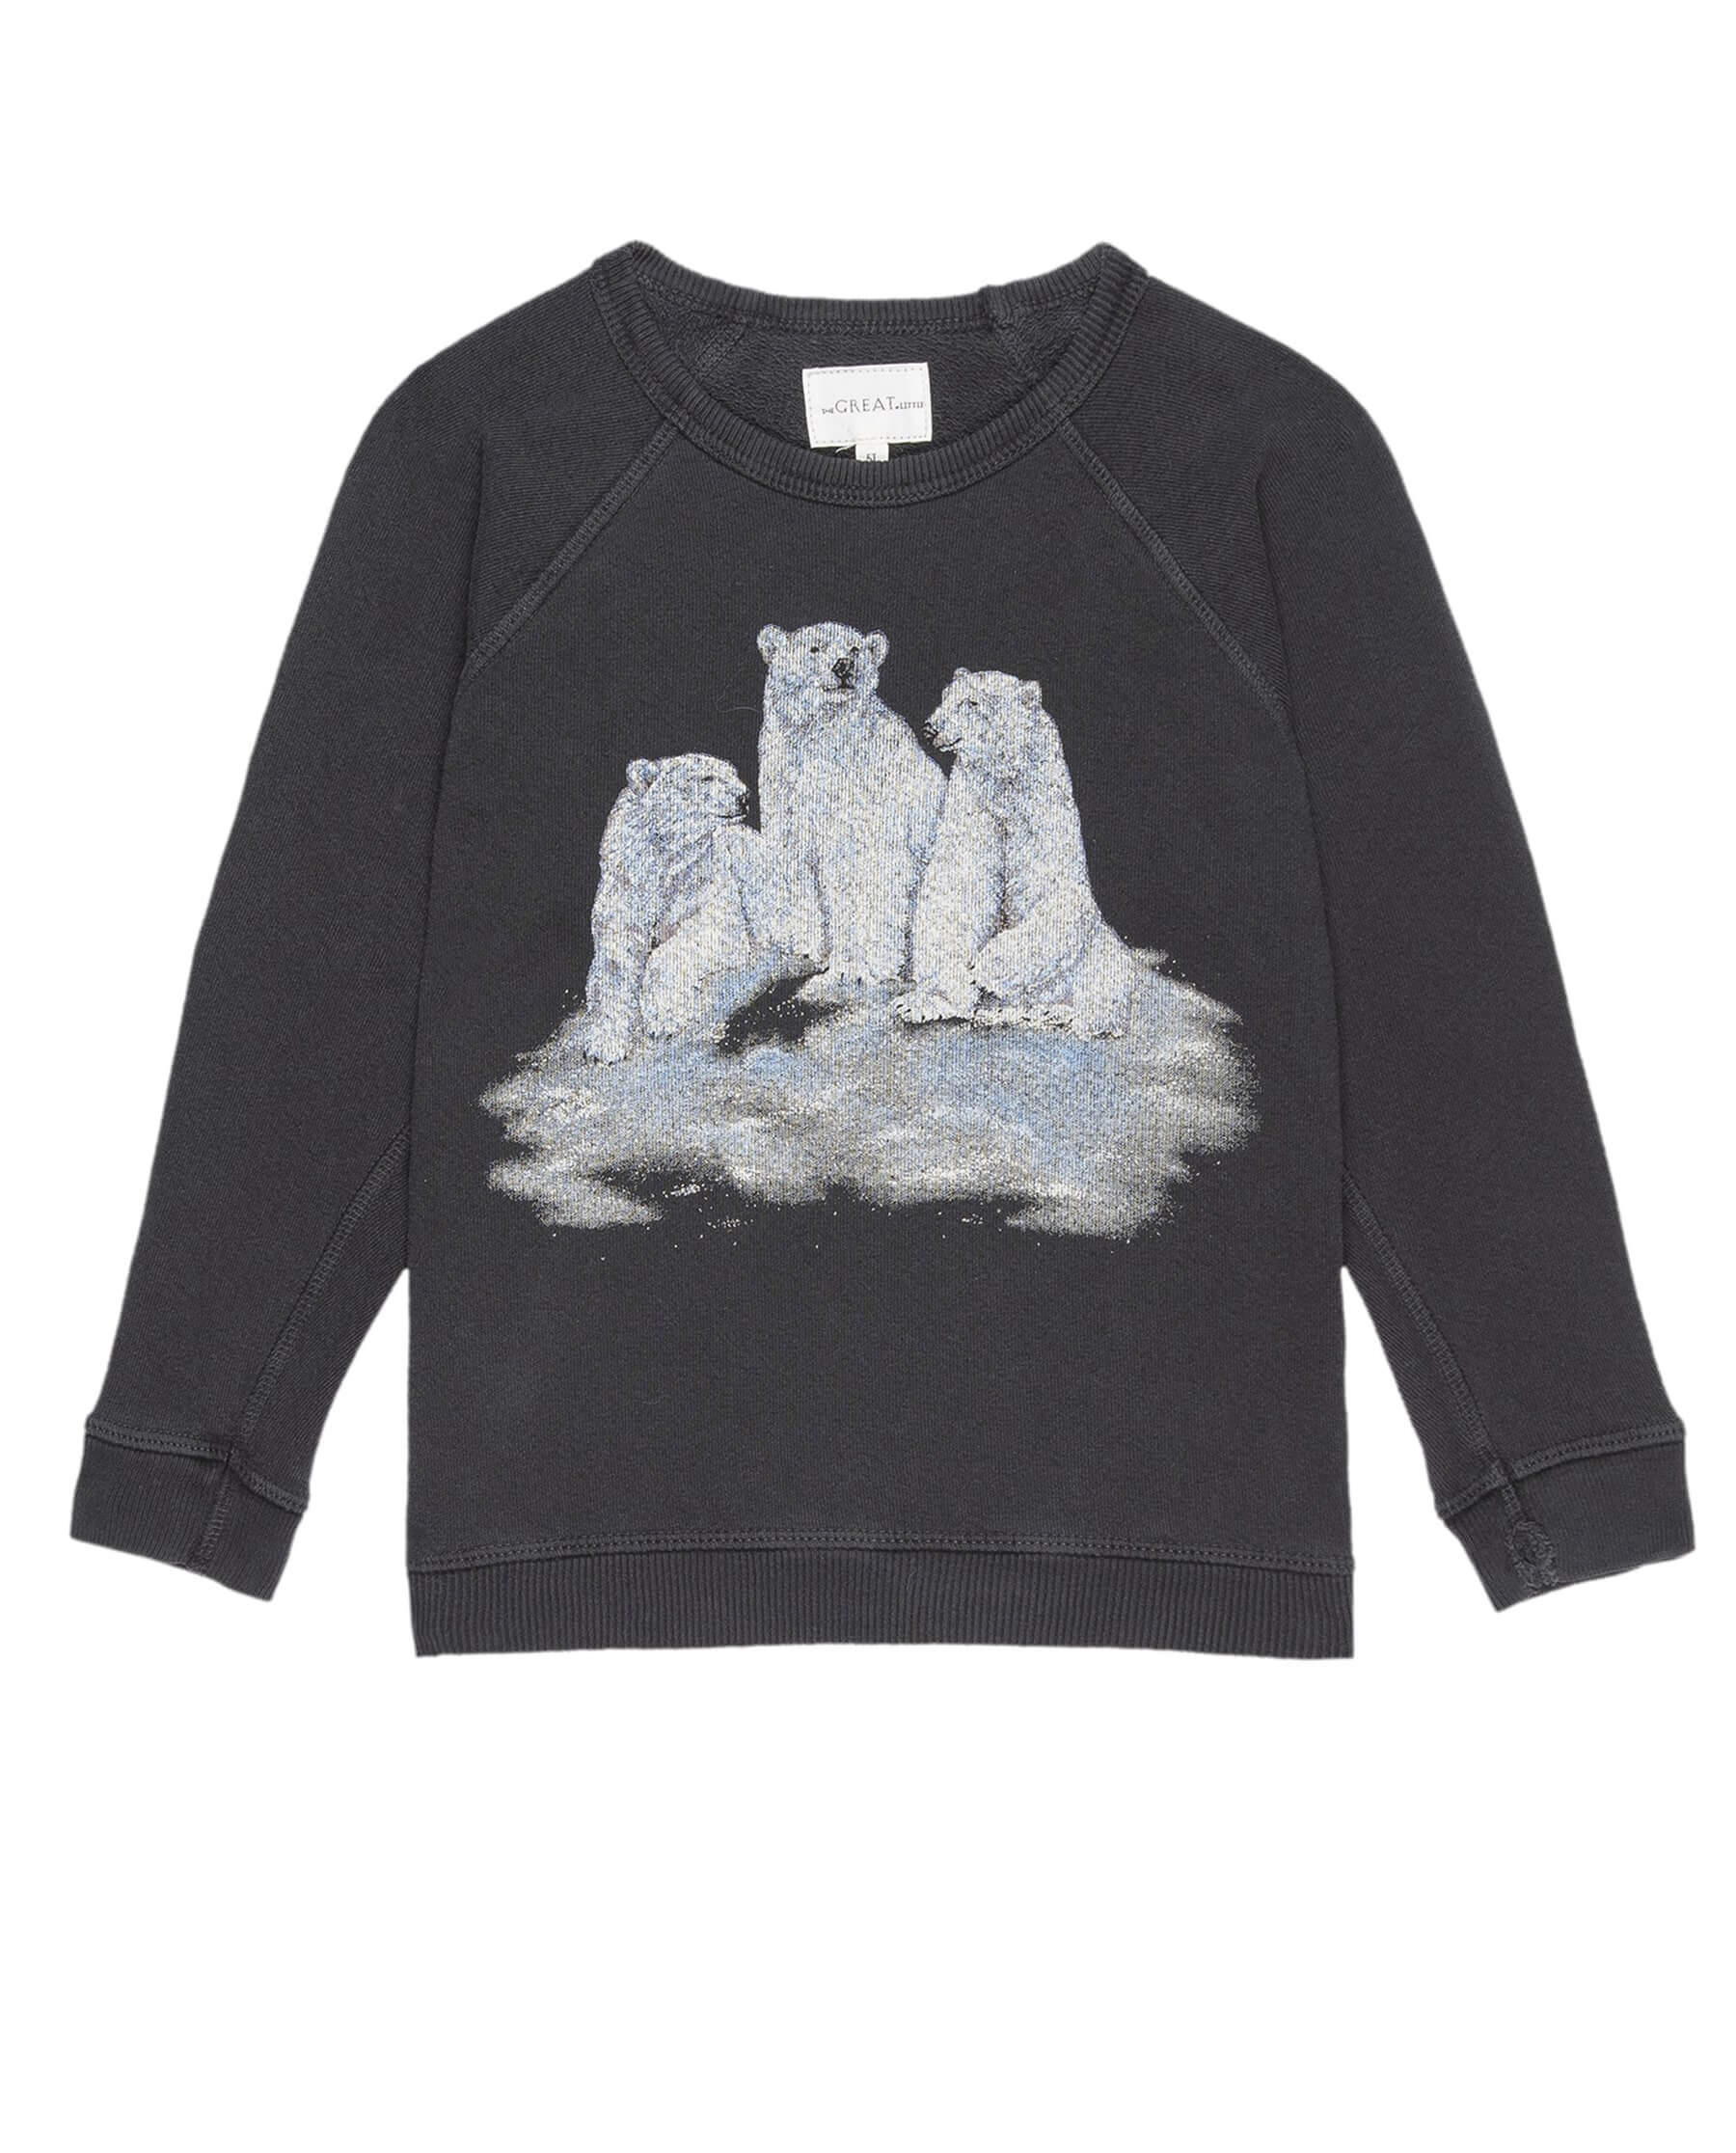 The Little College Sweatshirt. -- Washed Black with Polar Bear Graphic SWEATSHIRTS THE GREAT. HOL 23 D1 LITTLE